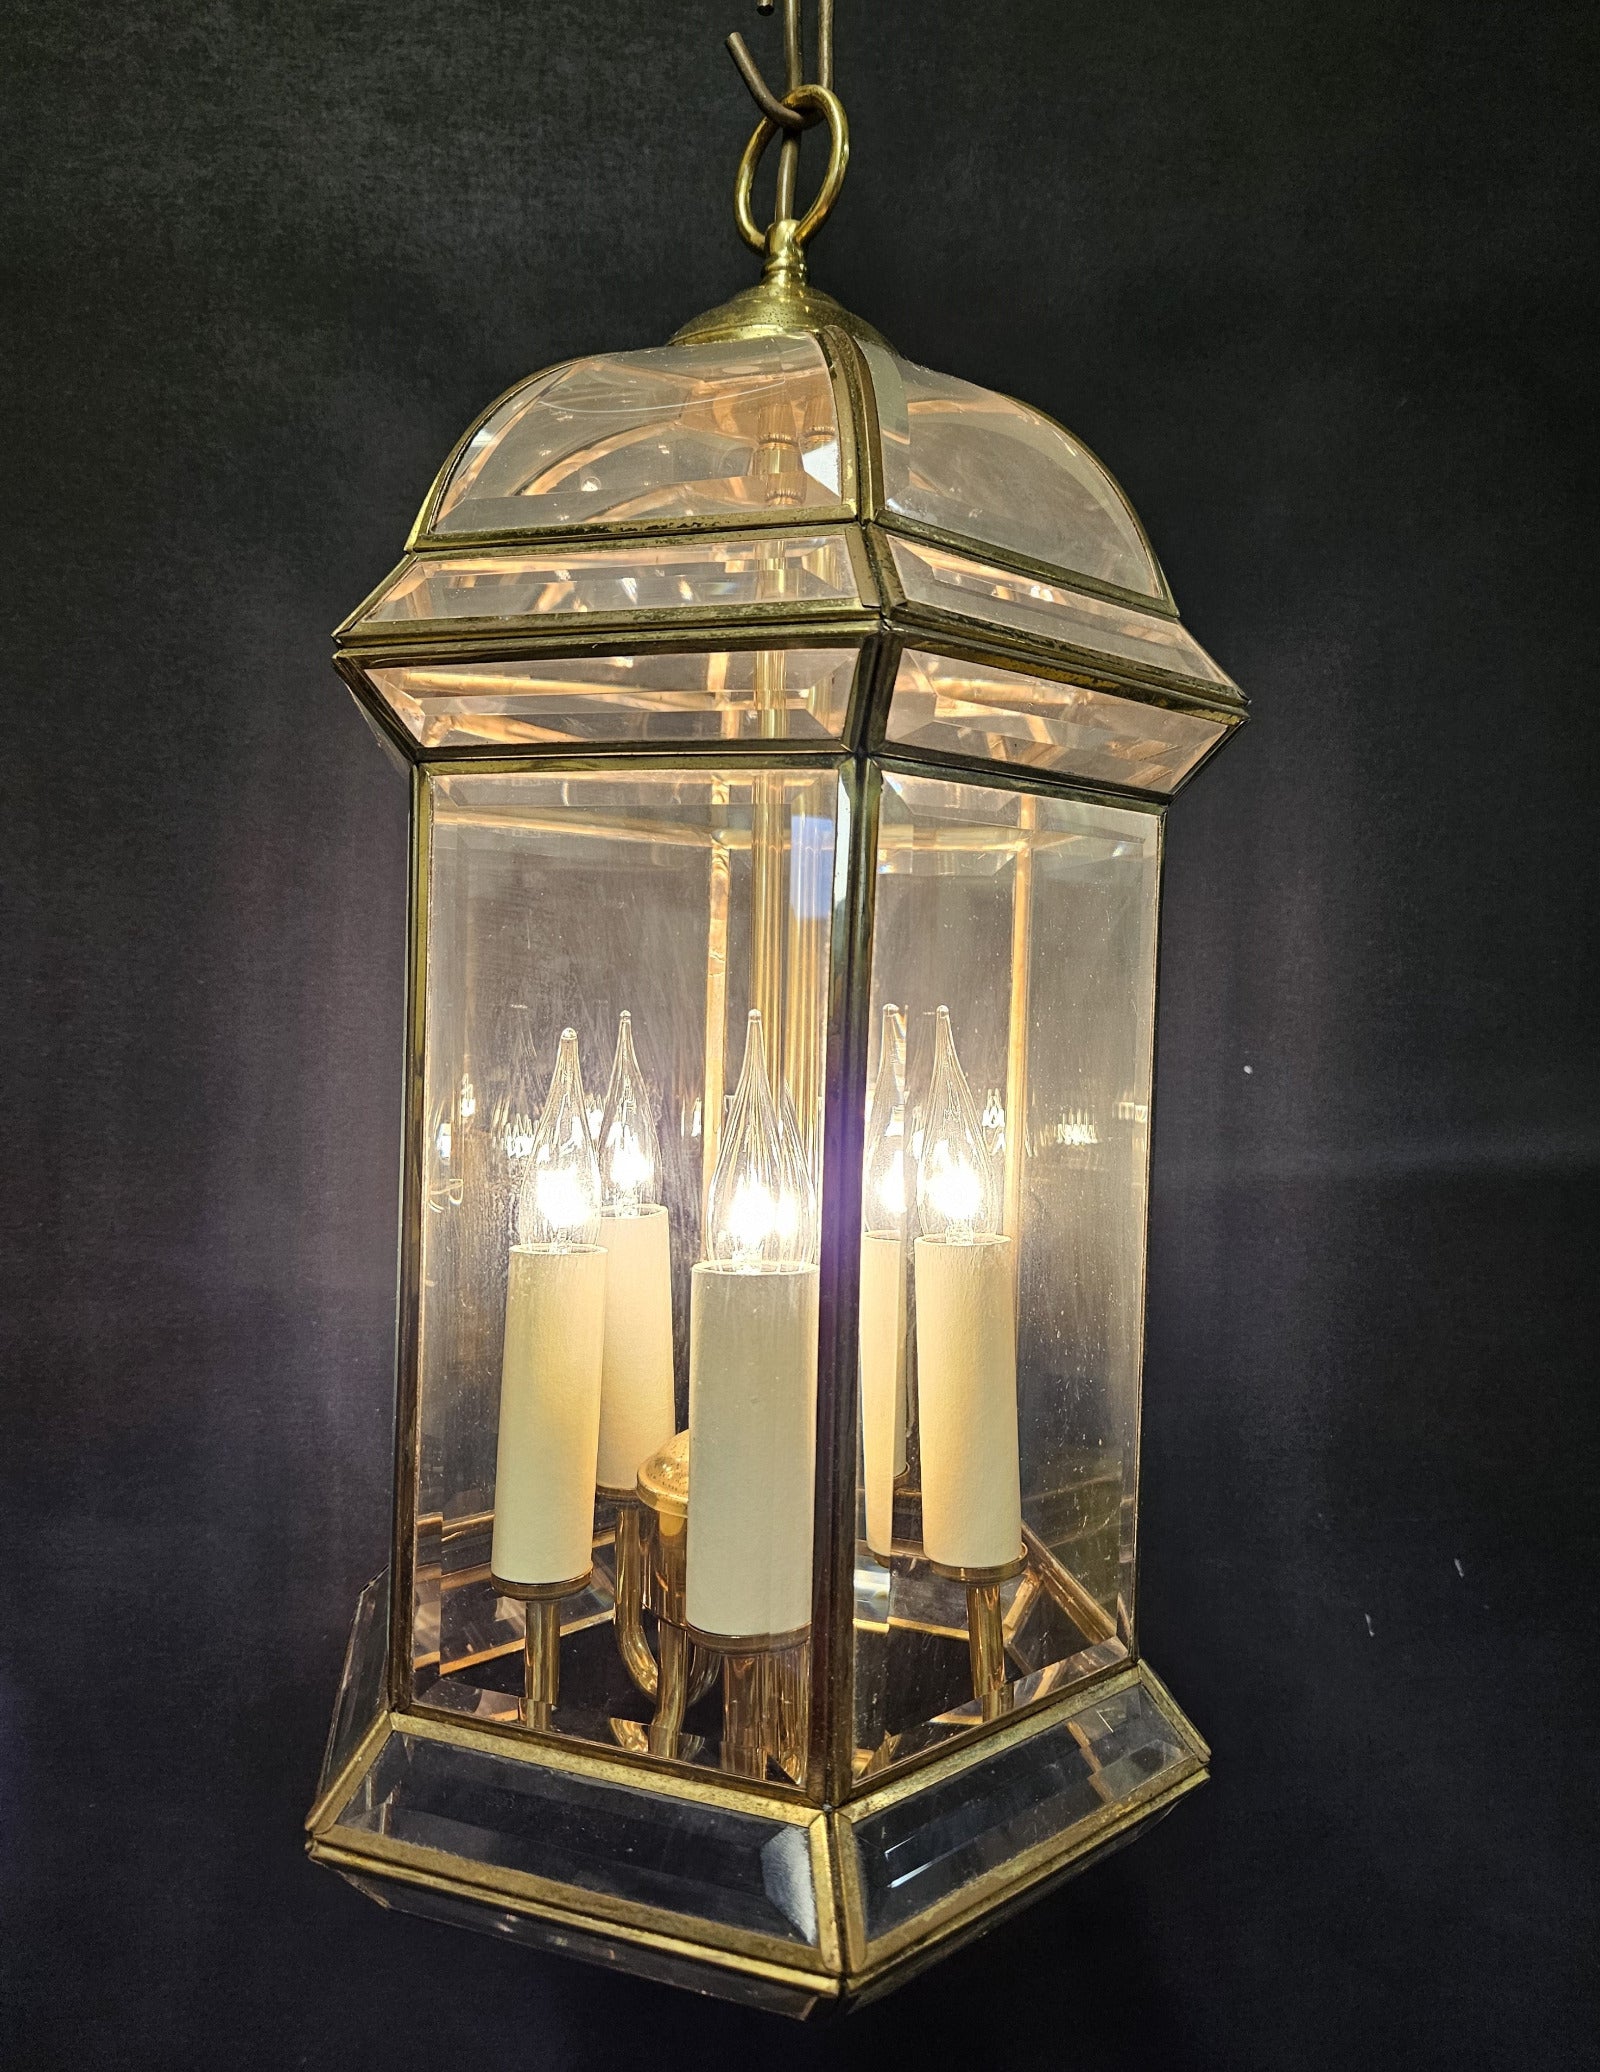 front on view showing lantern lit